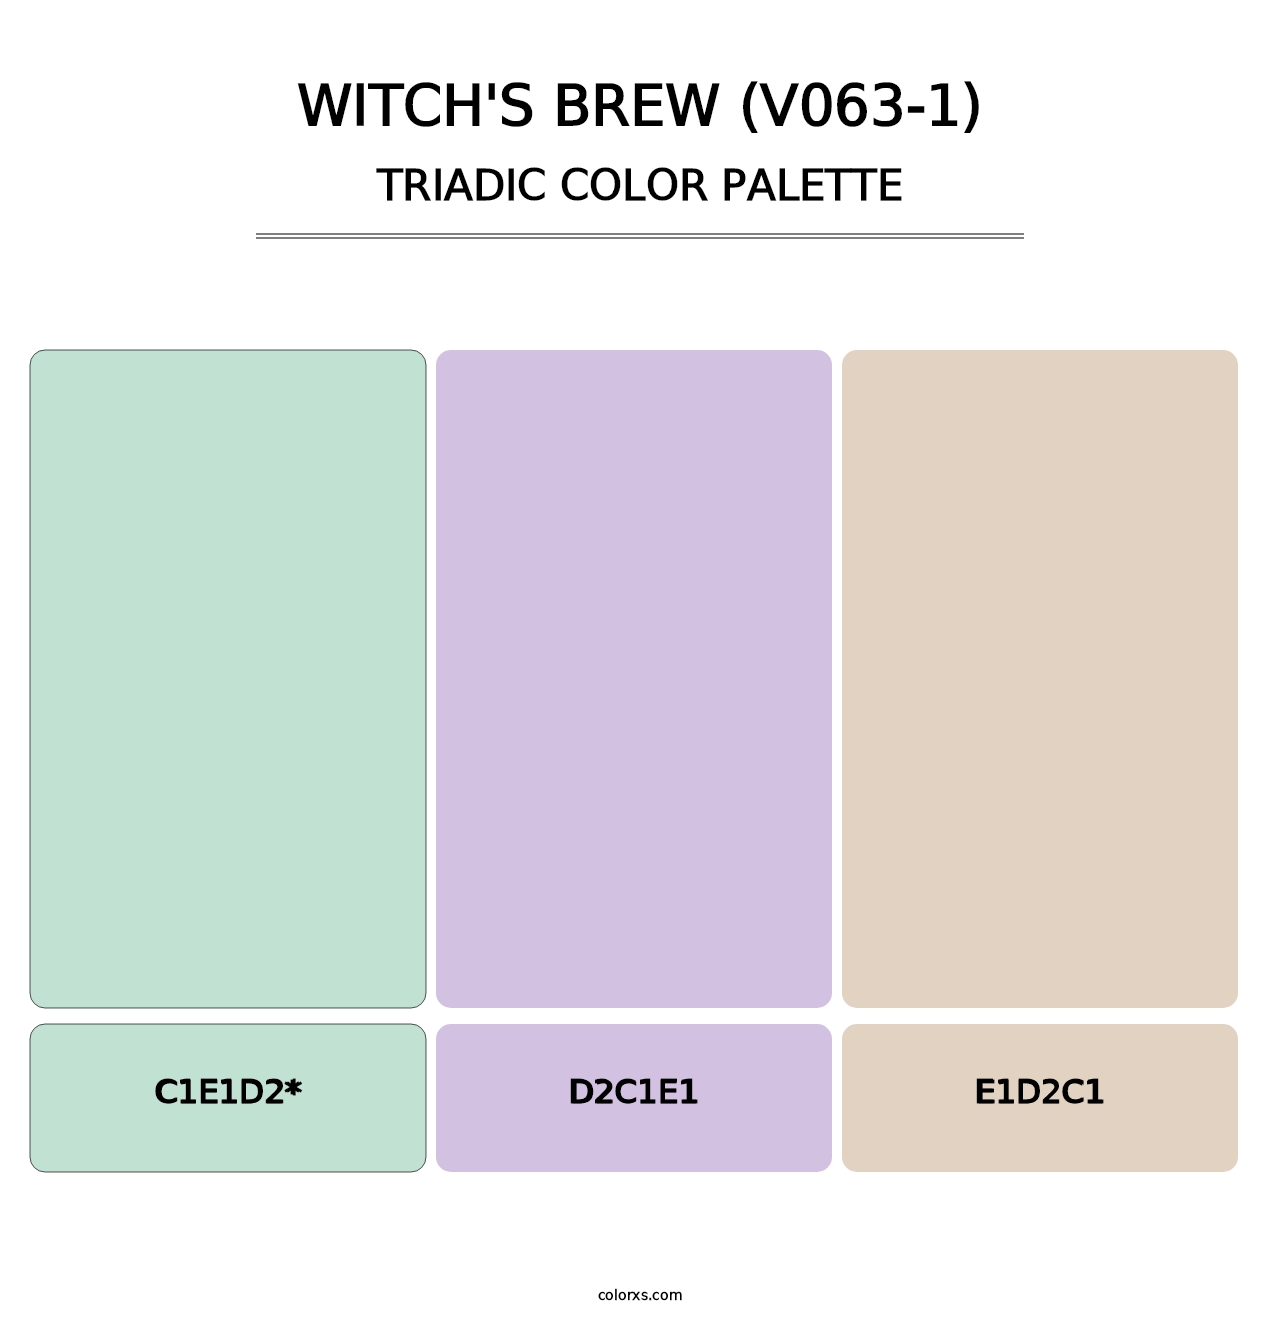 Witch's Brew (V063-1) - Triadic Color Palette